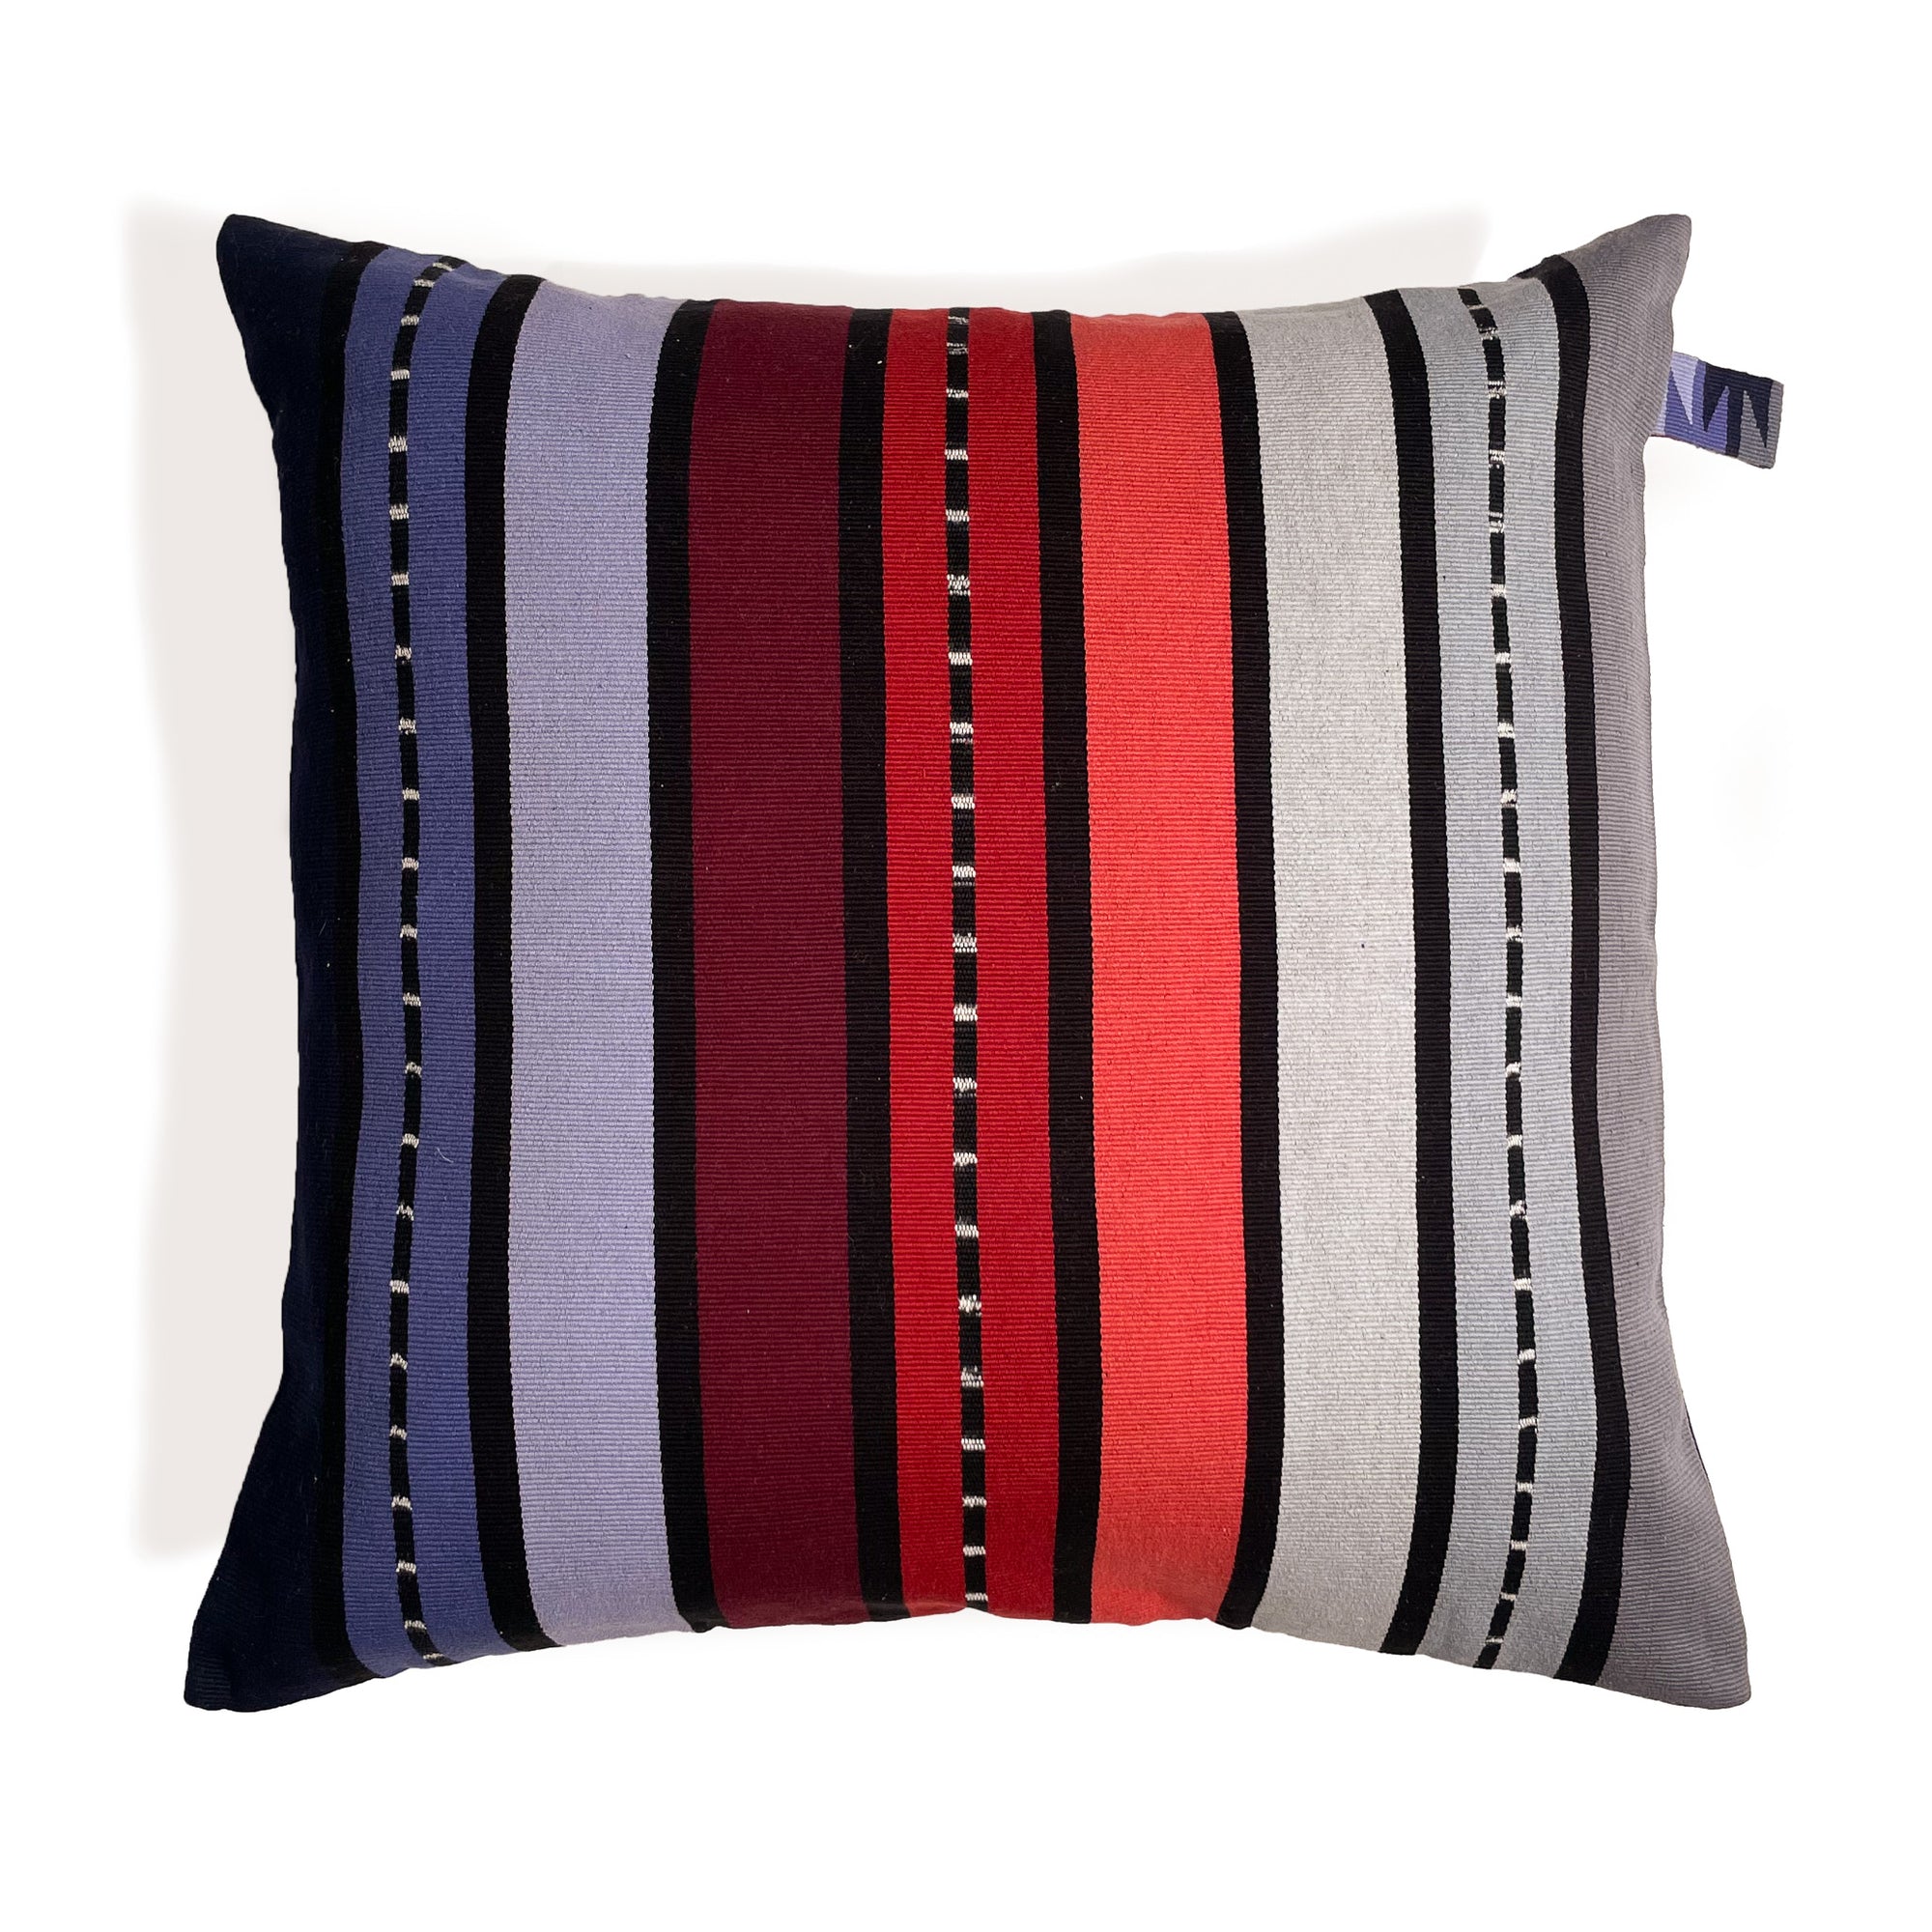 Front of cushion with colorful stripes grading from black, purple, red, to grey, with colorful cinta tag